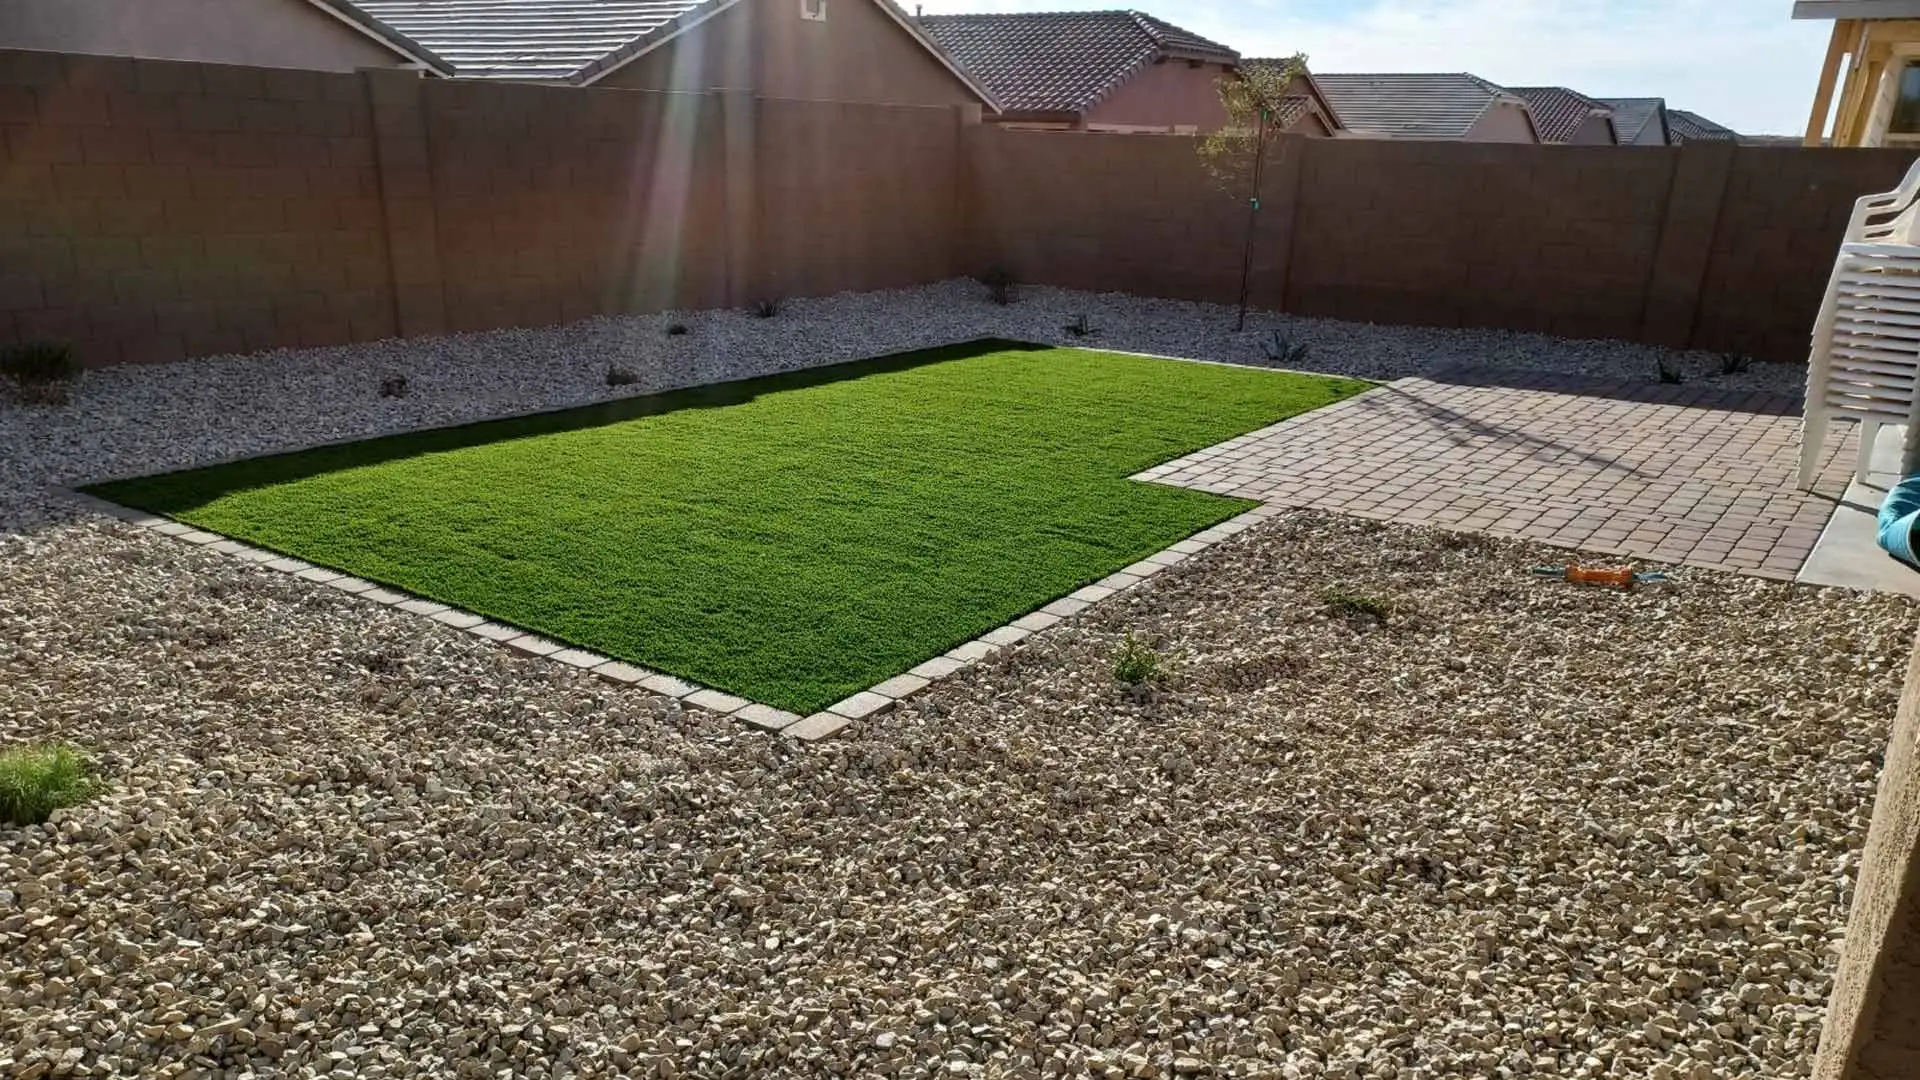 Artificial turf installed for backyard in Windsong, AZ.